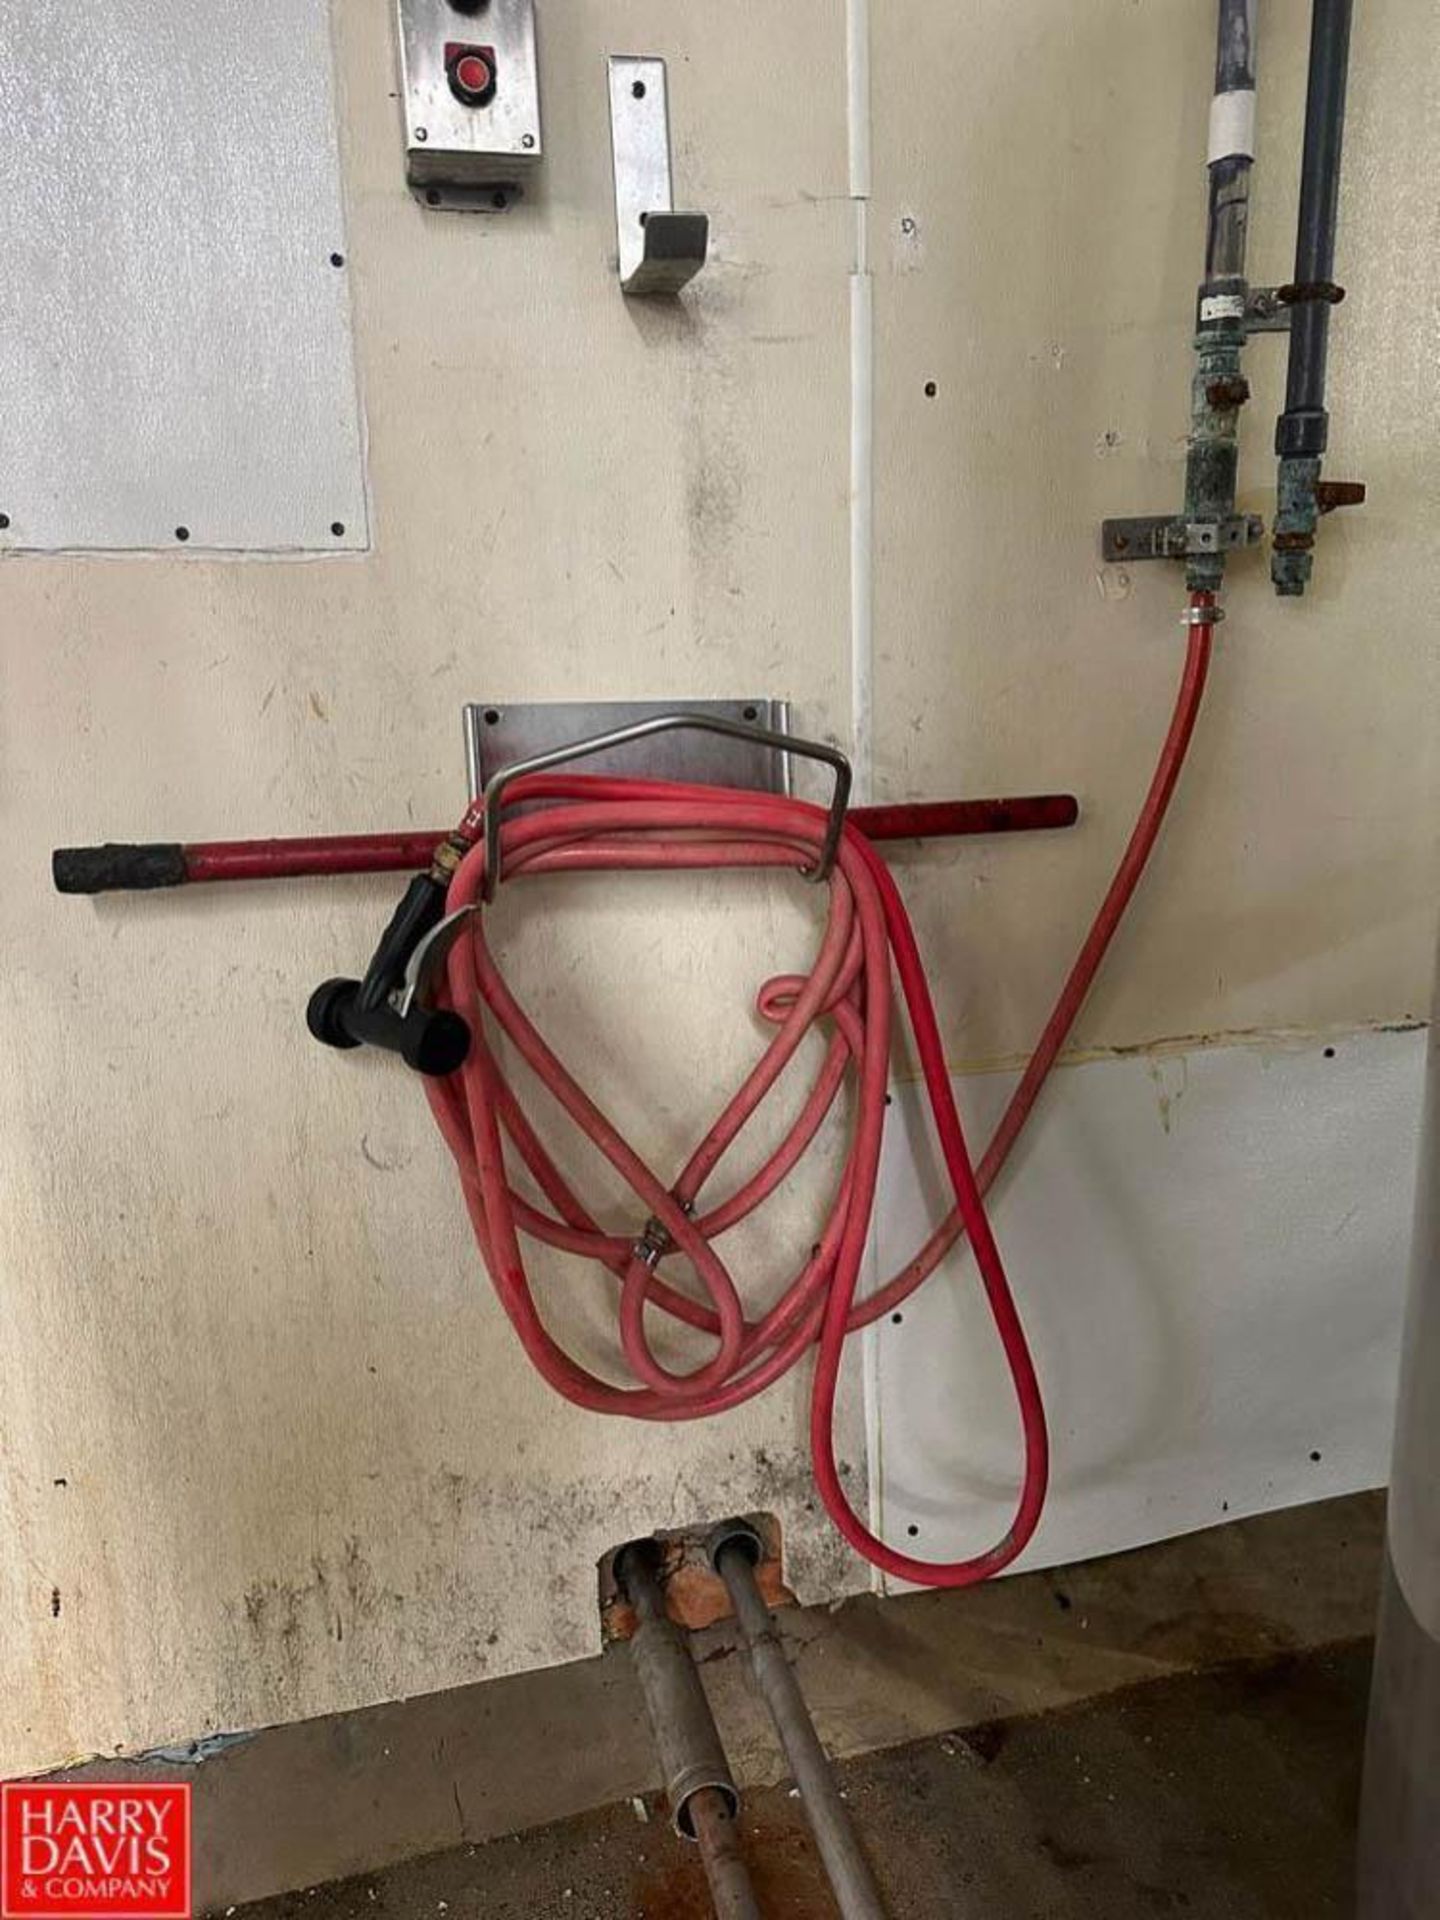 Hose Stations with Spray Guns - Rigging Fee: $125 - Image 2 of 3